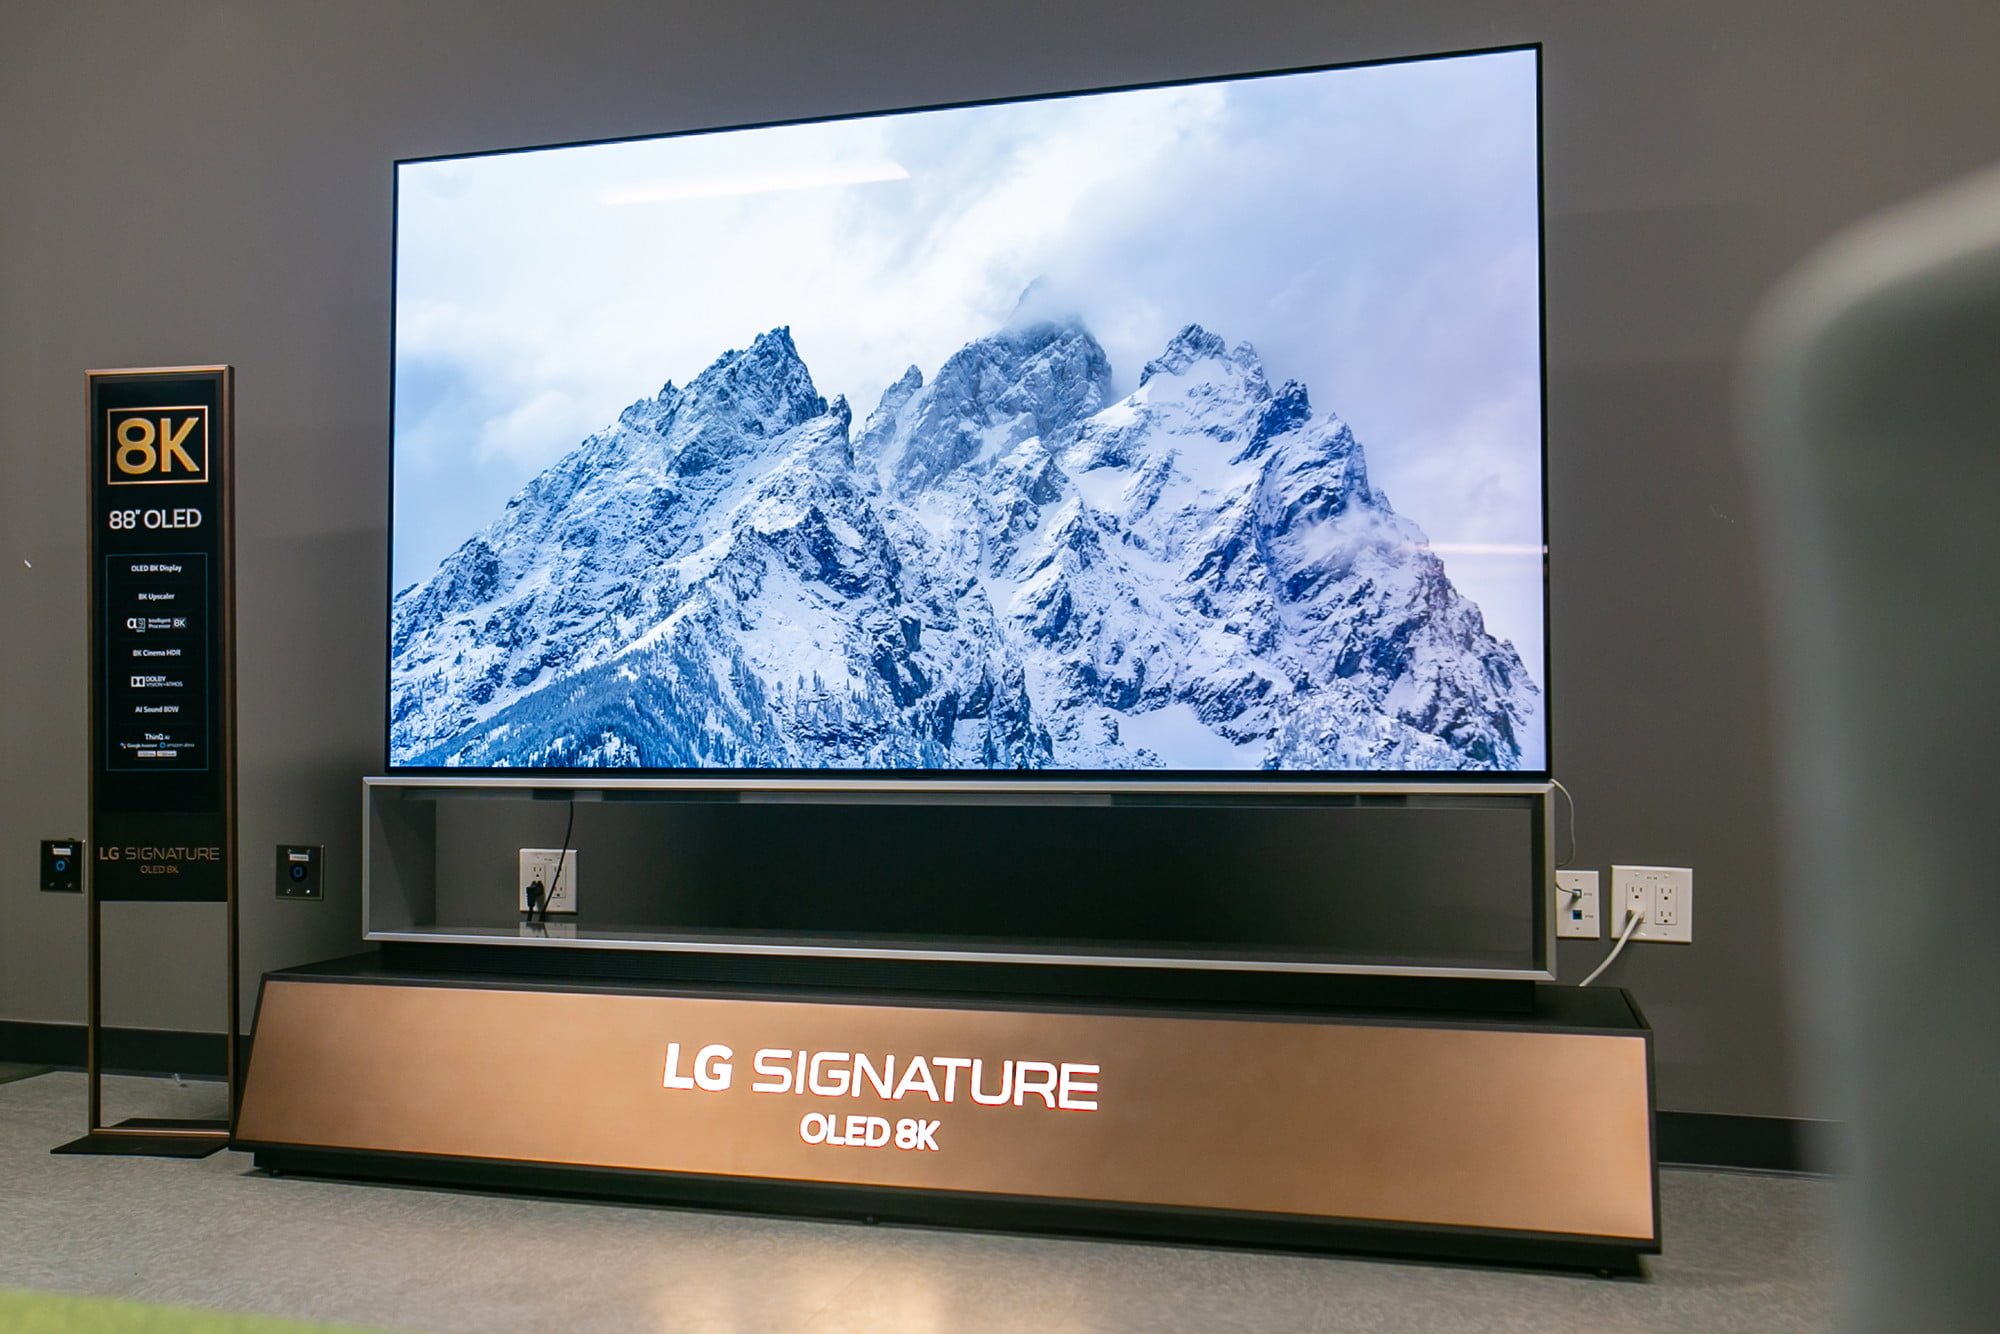 LG has released worlds largest OLED TV, features an 88 inch 8K display